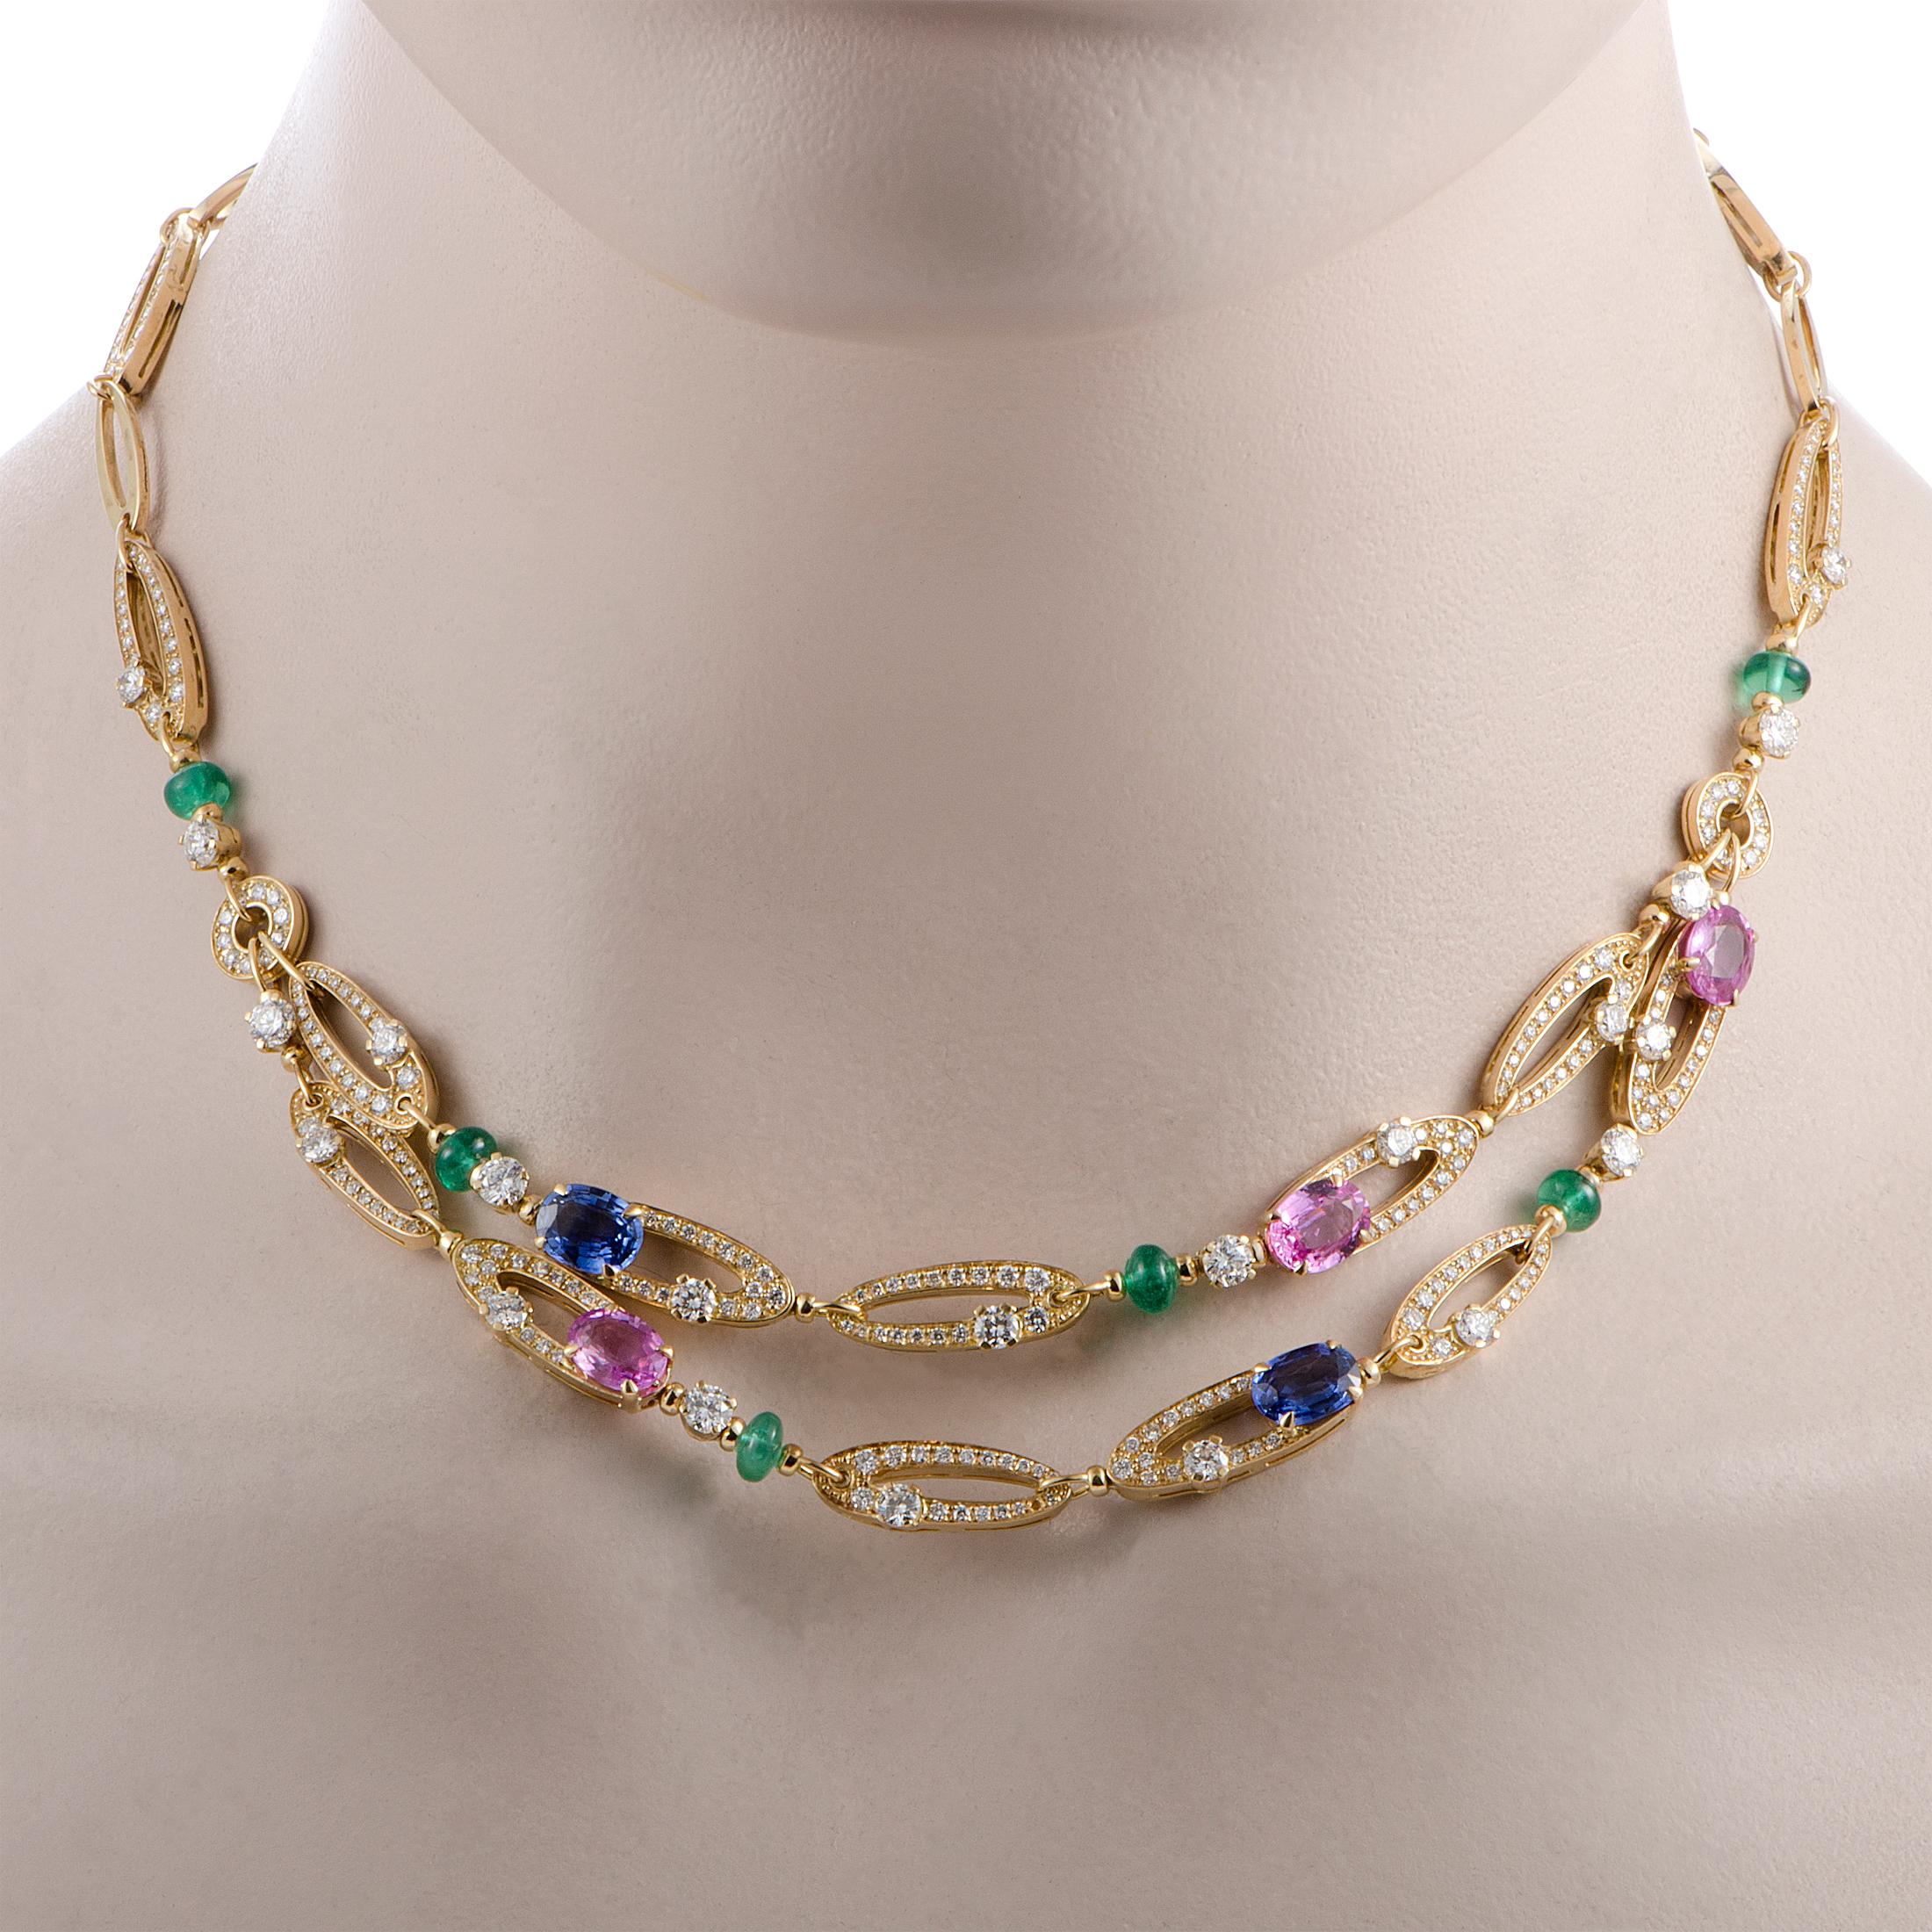 The Bvlgari “Elisia” necklace is crafted from 18K yellow gold and set with diamonds, emeralds and blue and pink sapphires. The diamonds boast grade E color and VS clarity and total approximately 6.00 carats, while the emeralds and sapphires amount